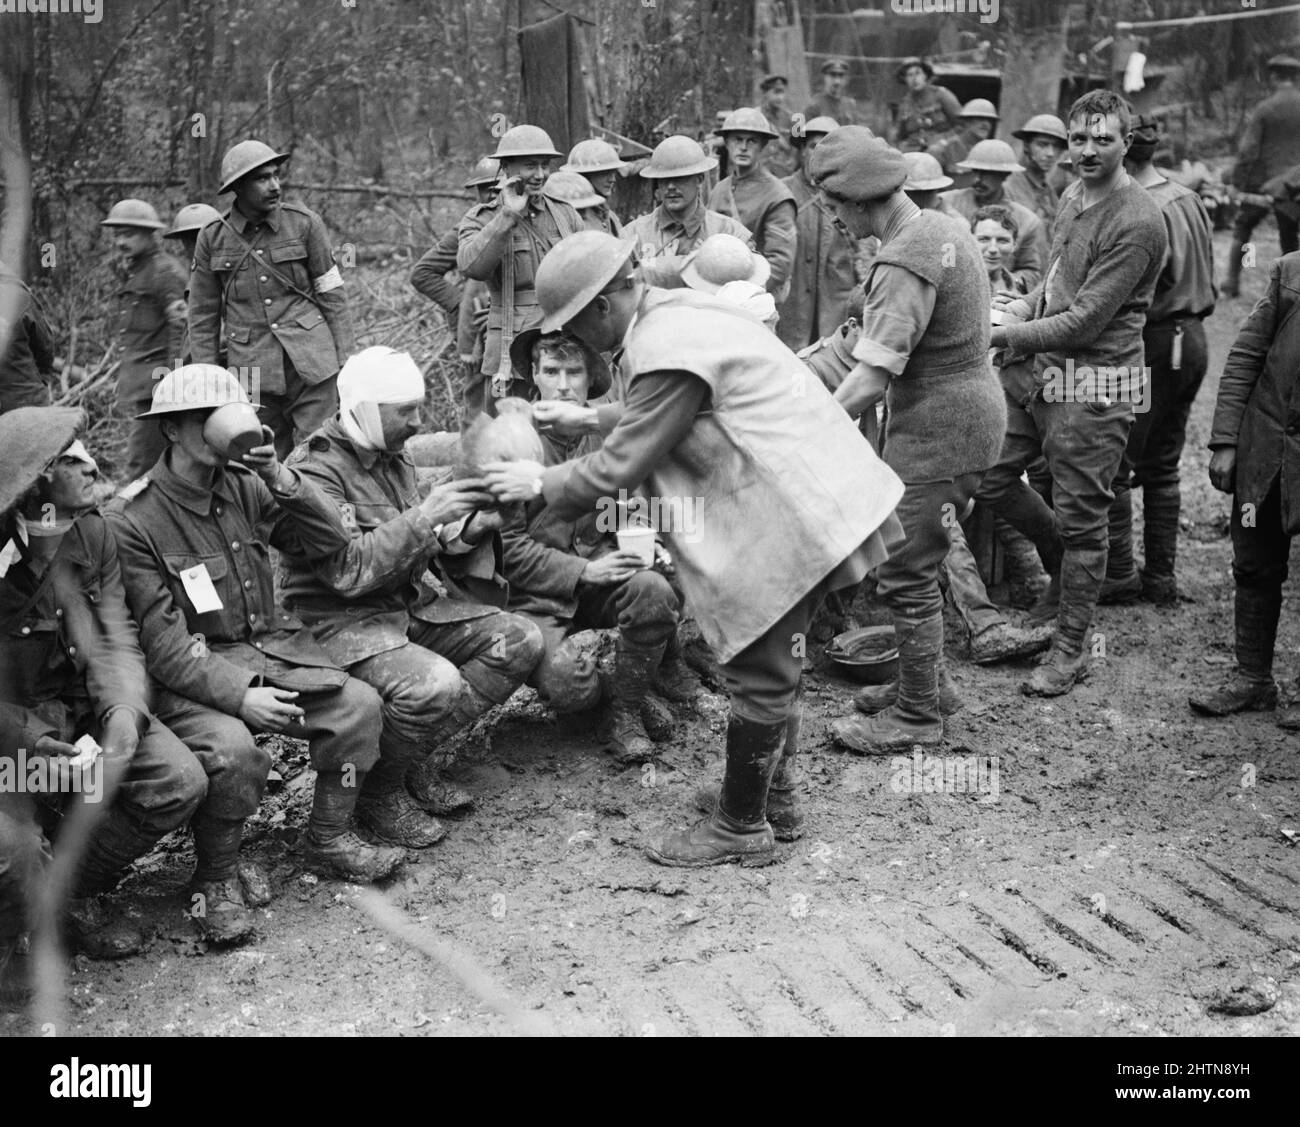 Battle of the Ancre 13 - 18 November 1916: Wounded British troops at a Dressing Station in Aveluy Wood. One man shows damage to his steel helmet from which he suffered a head wound. 13 November 1916 during the Battle of the Somme Stock Photo